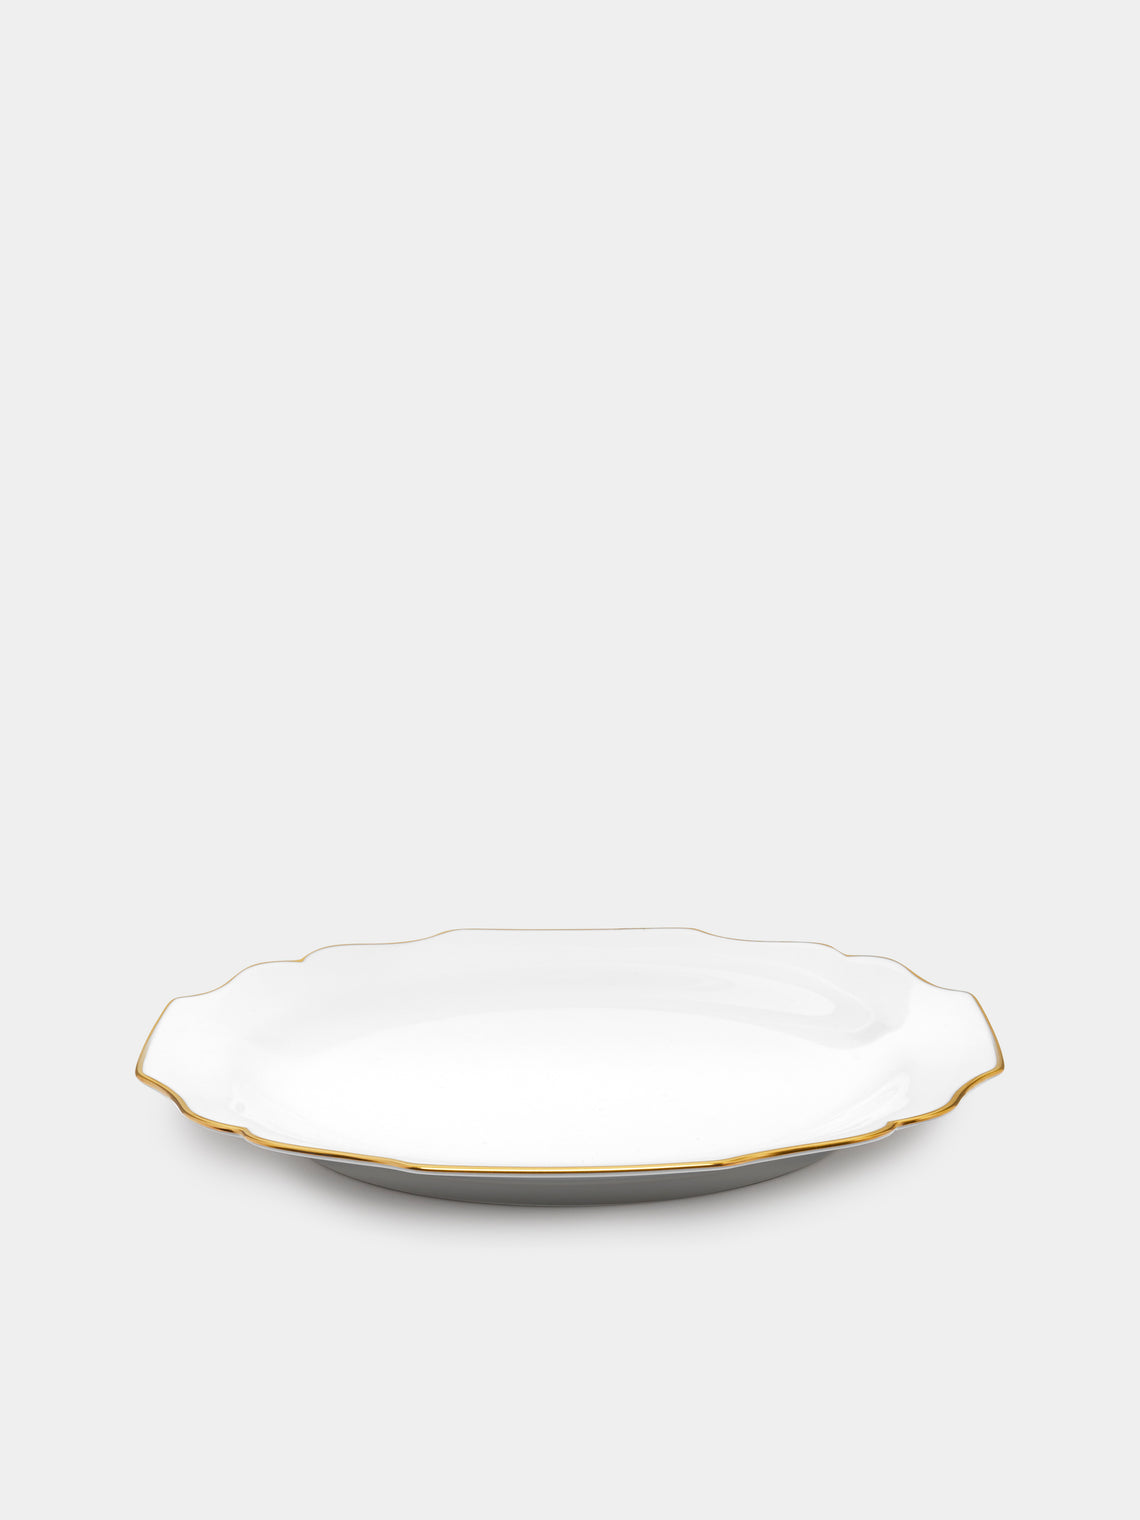 Augarten - Belvedere Hand-Painted Porcelain Salad Plate - White - ABASK